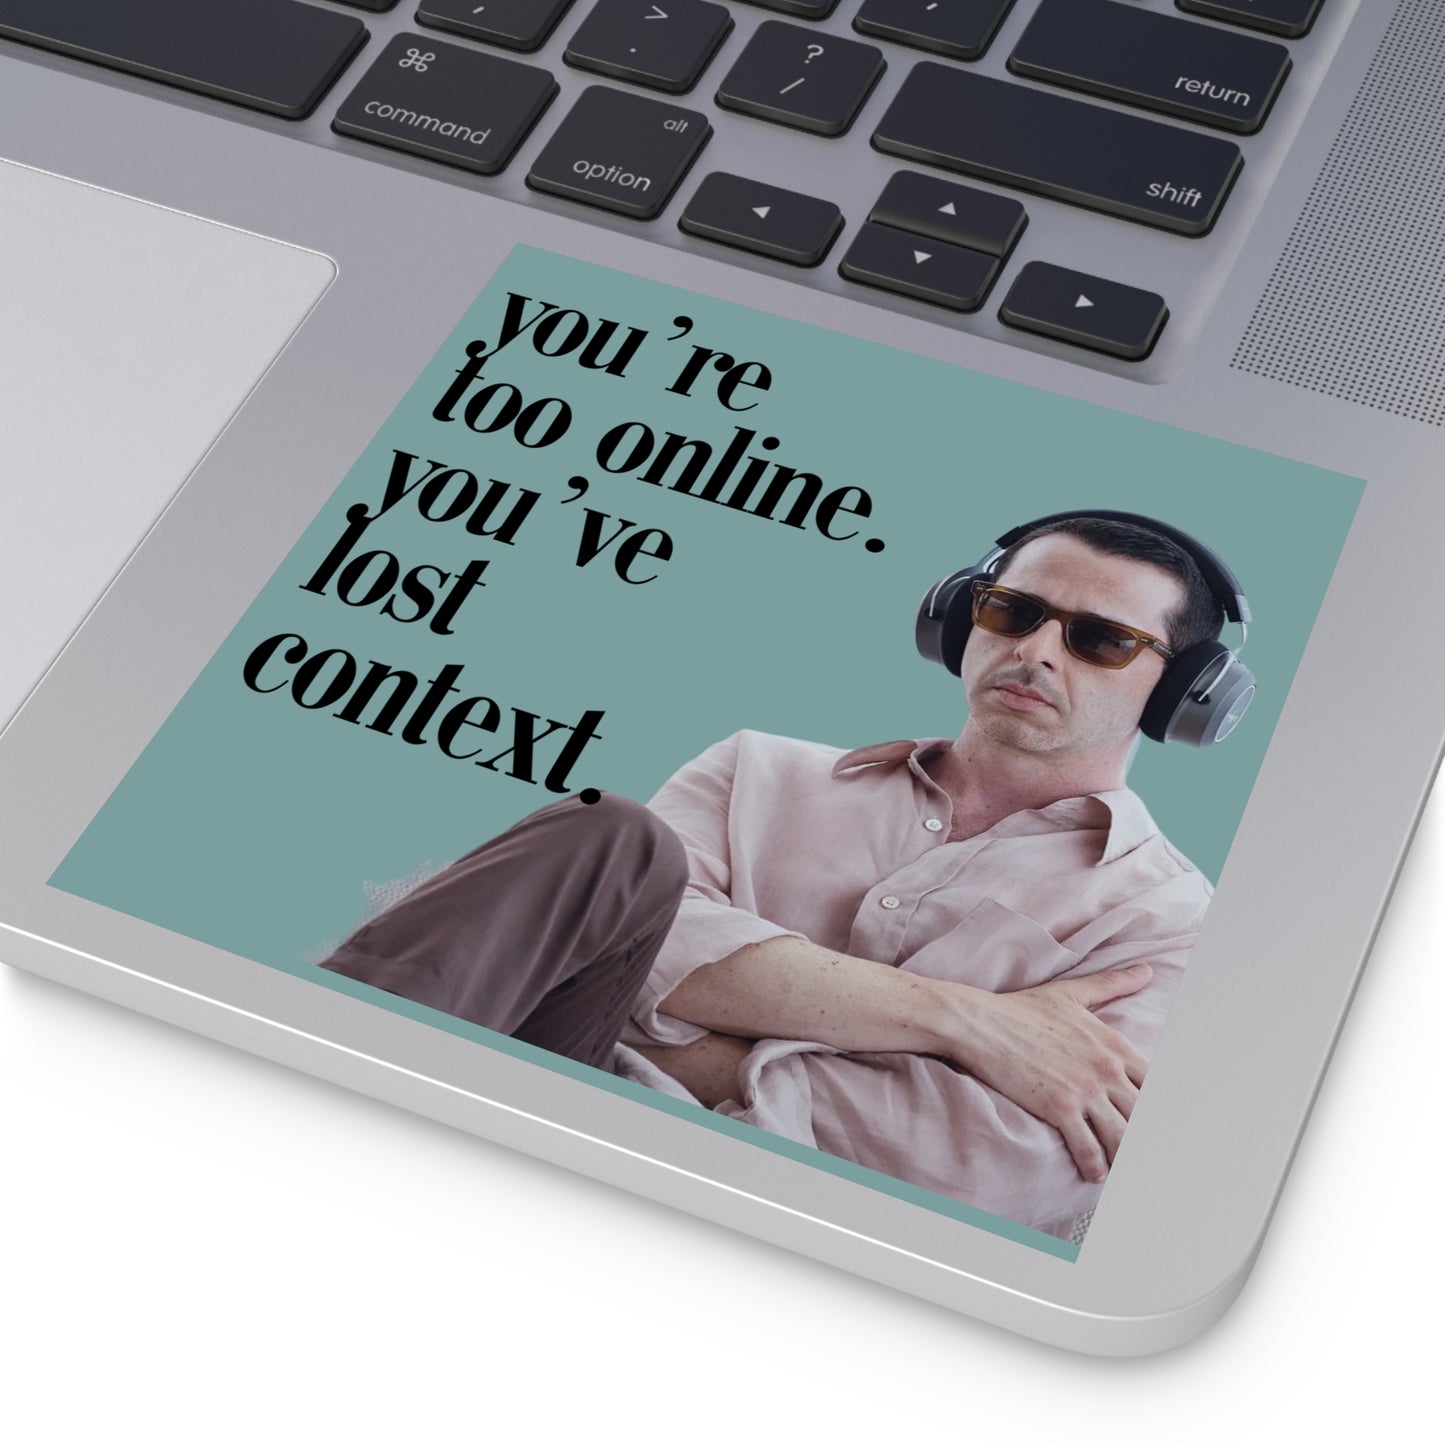 You're too online you've lost context Kendall Roy Stan Square Stickers, Indoor\Outdoor